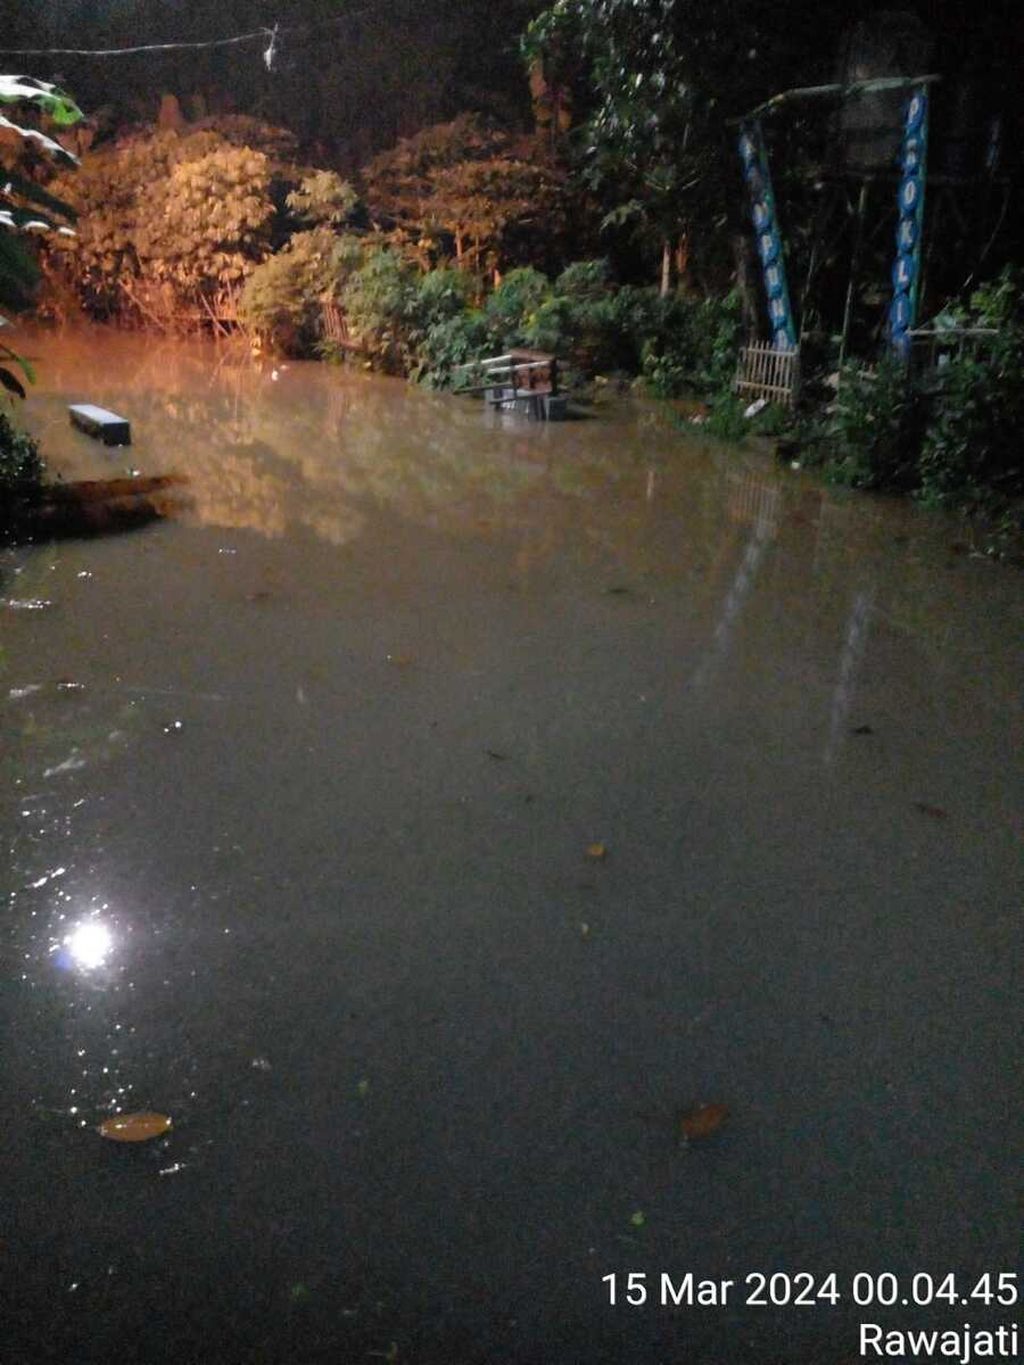 Flooding has inundated the Rawajati area in Pancoran district, South Jakarta early on Friday (15/3/2024) morning. The situation has caused panic among residents. The risk of flooding still remains in Jakarta considering that the dry season is predicted to experience a setback.